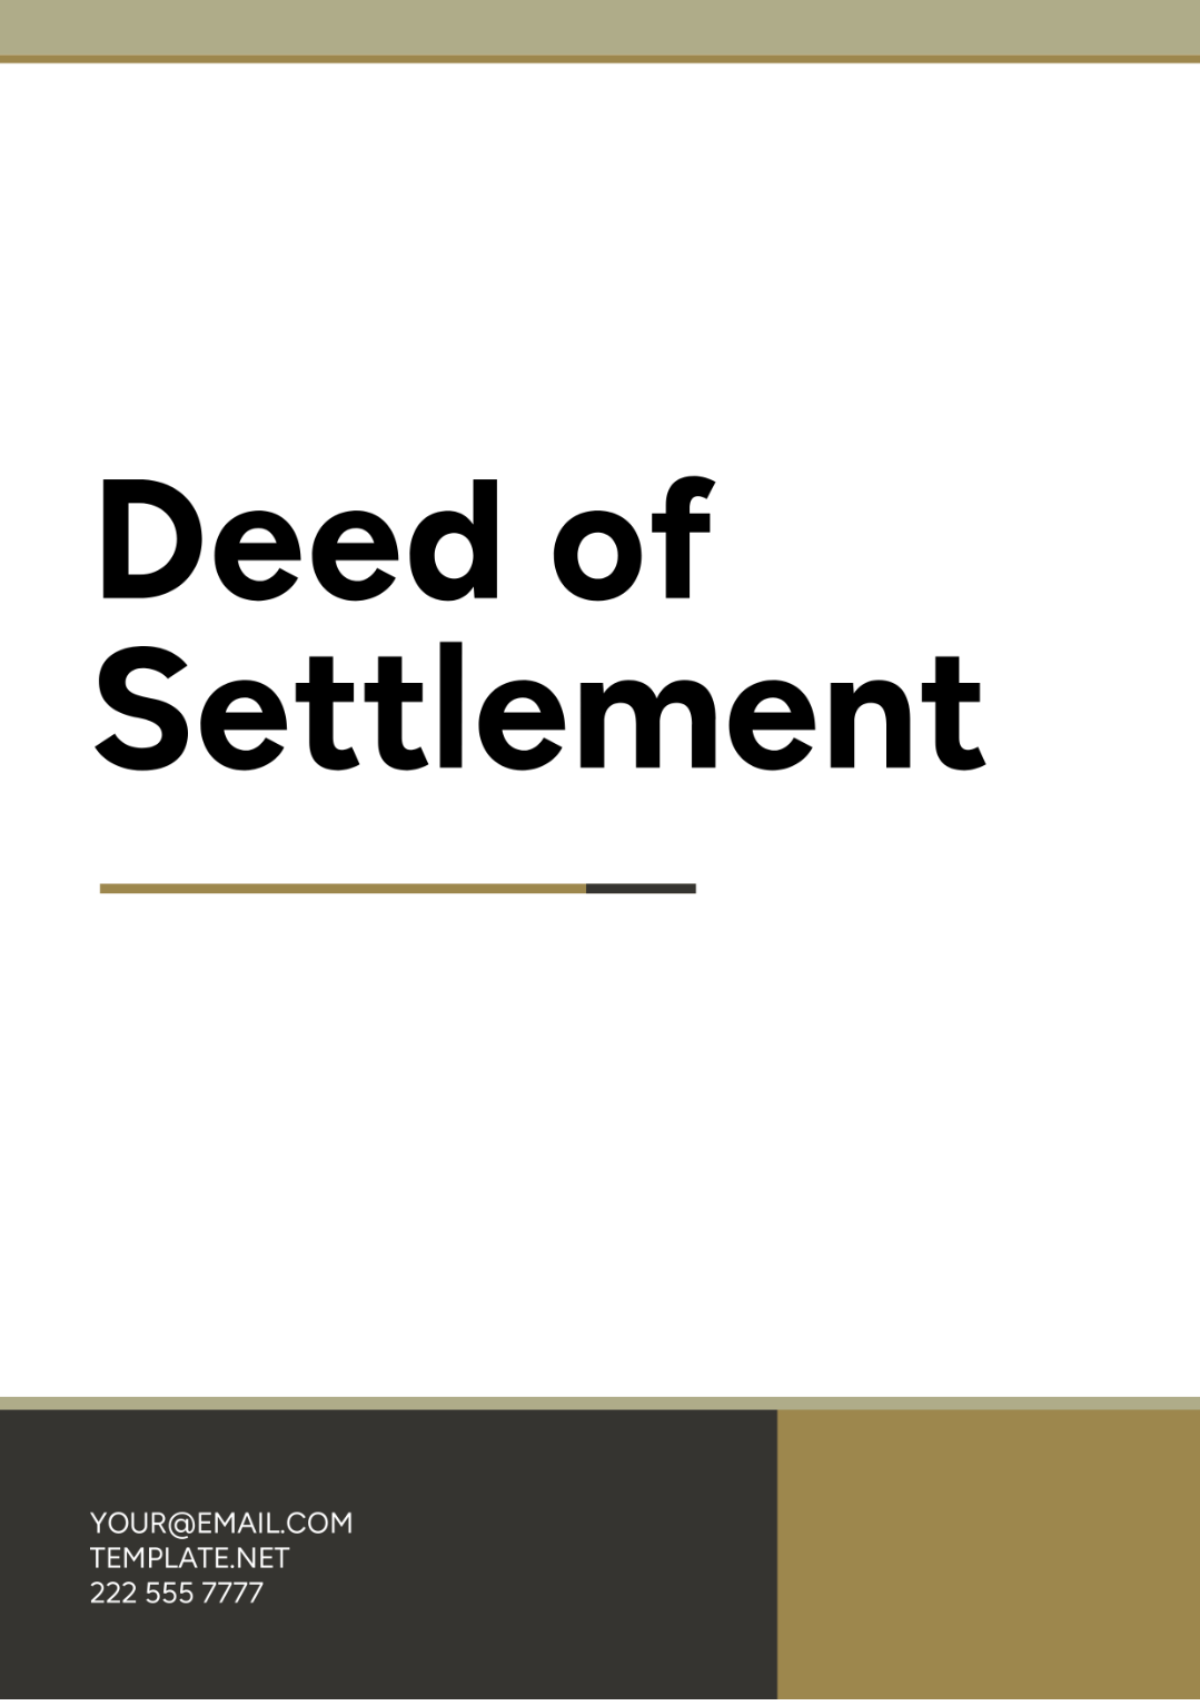 Free Deed of Settlement Template